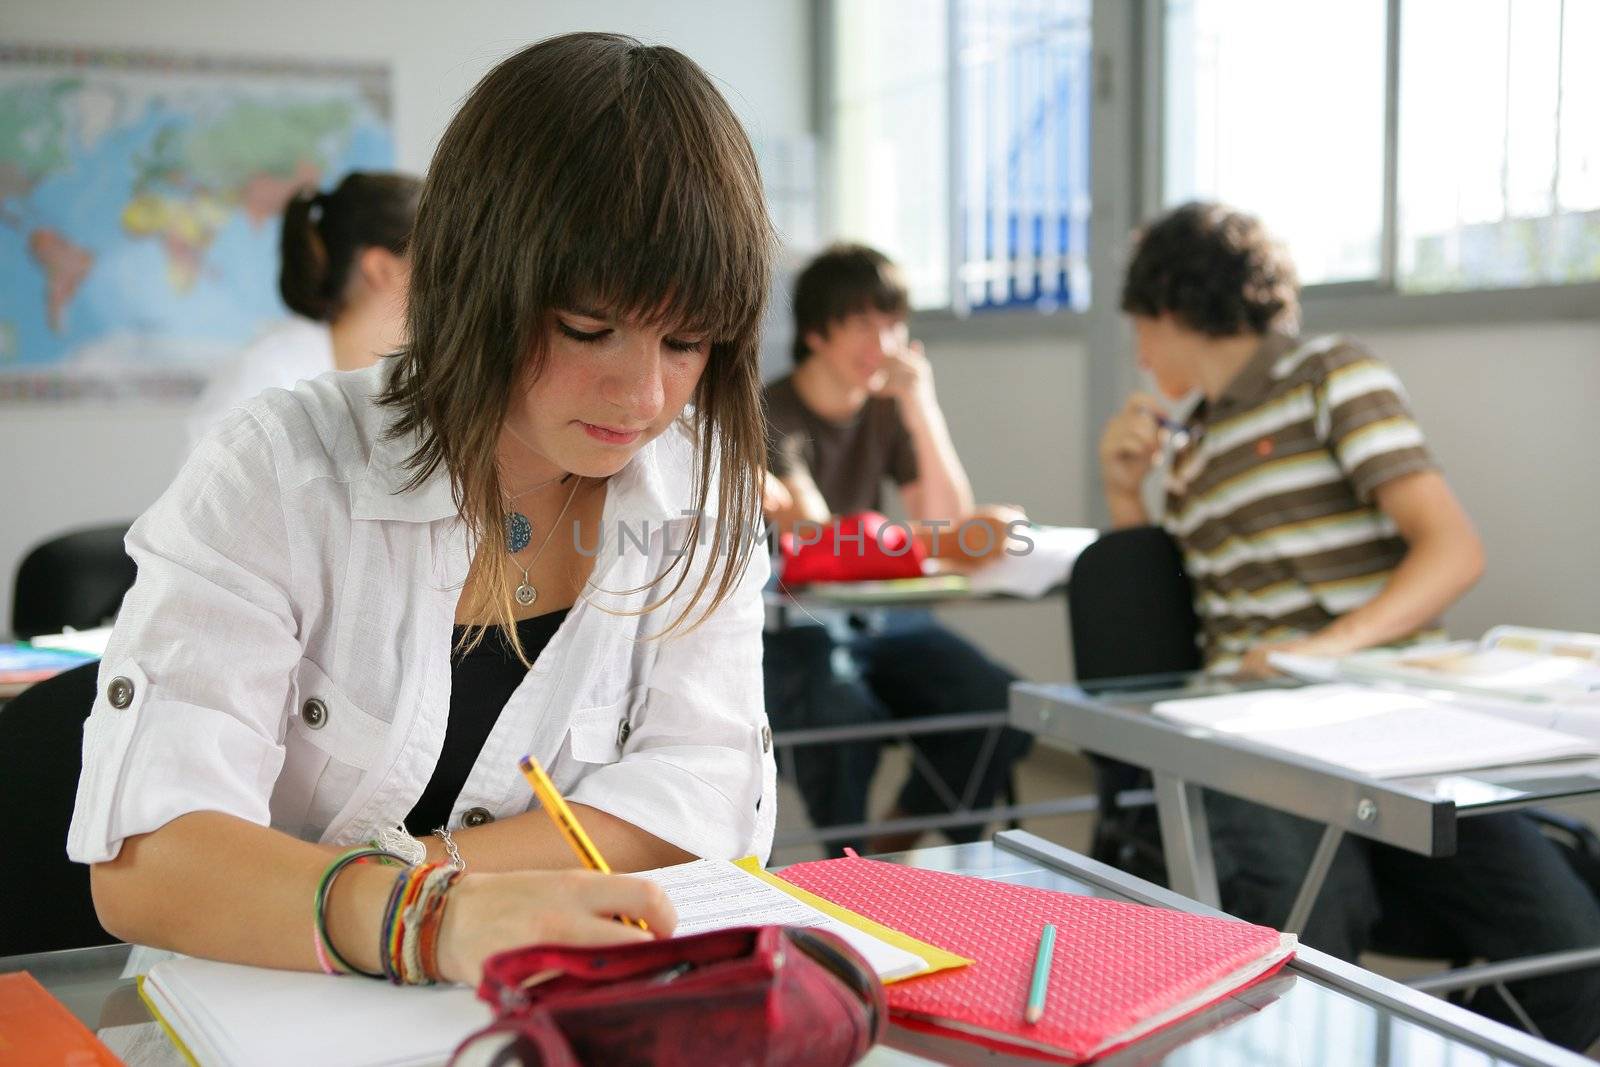 a teenage girl studying in a classroom by phovoir